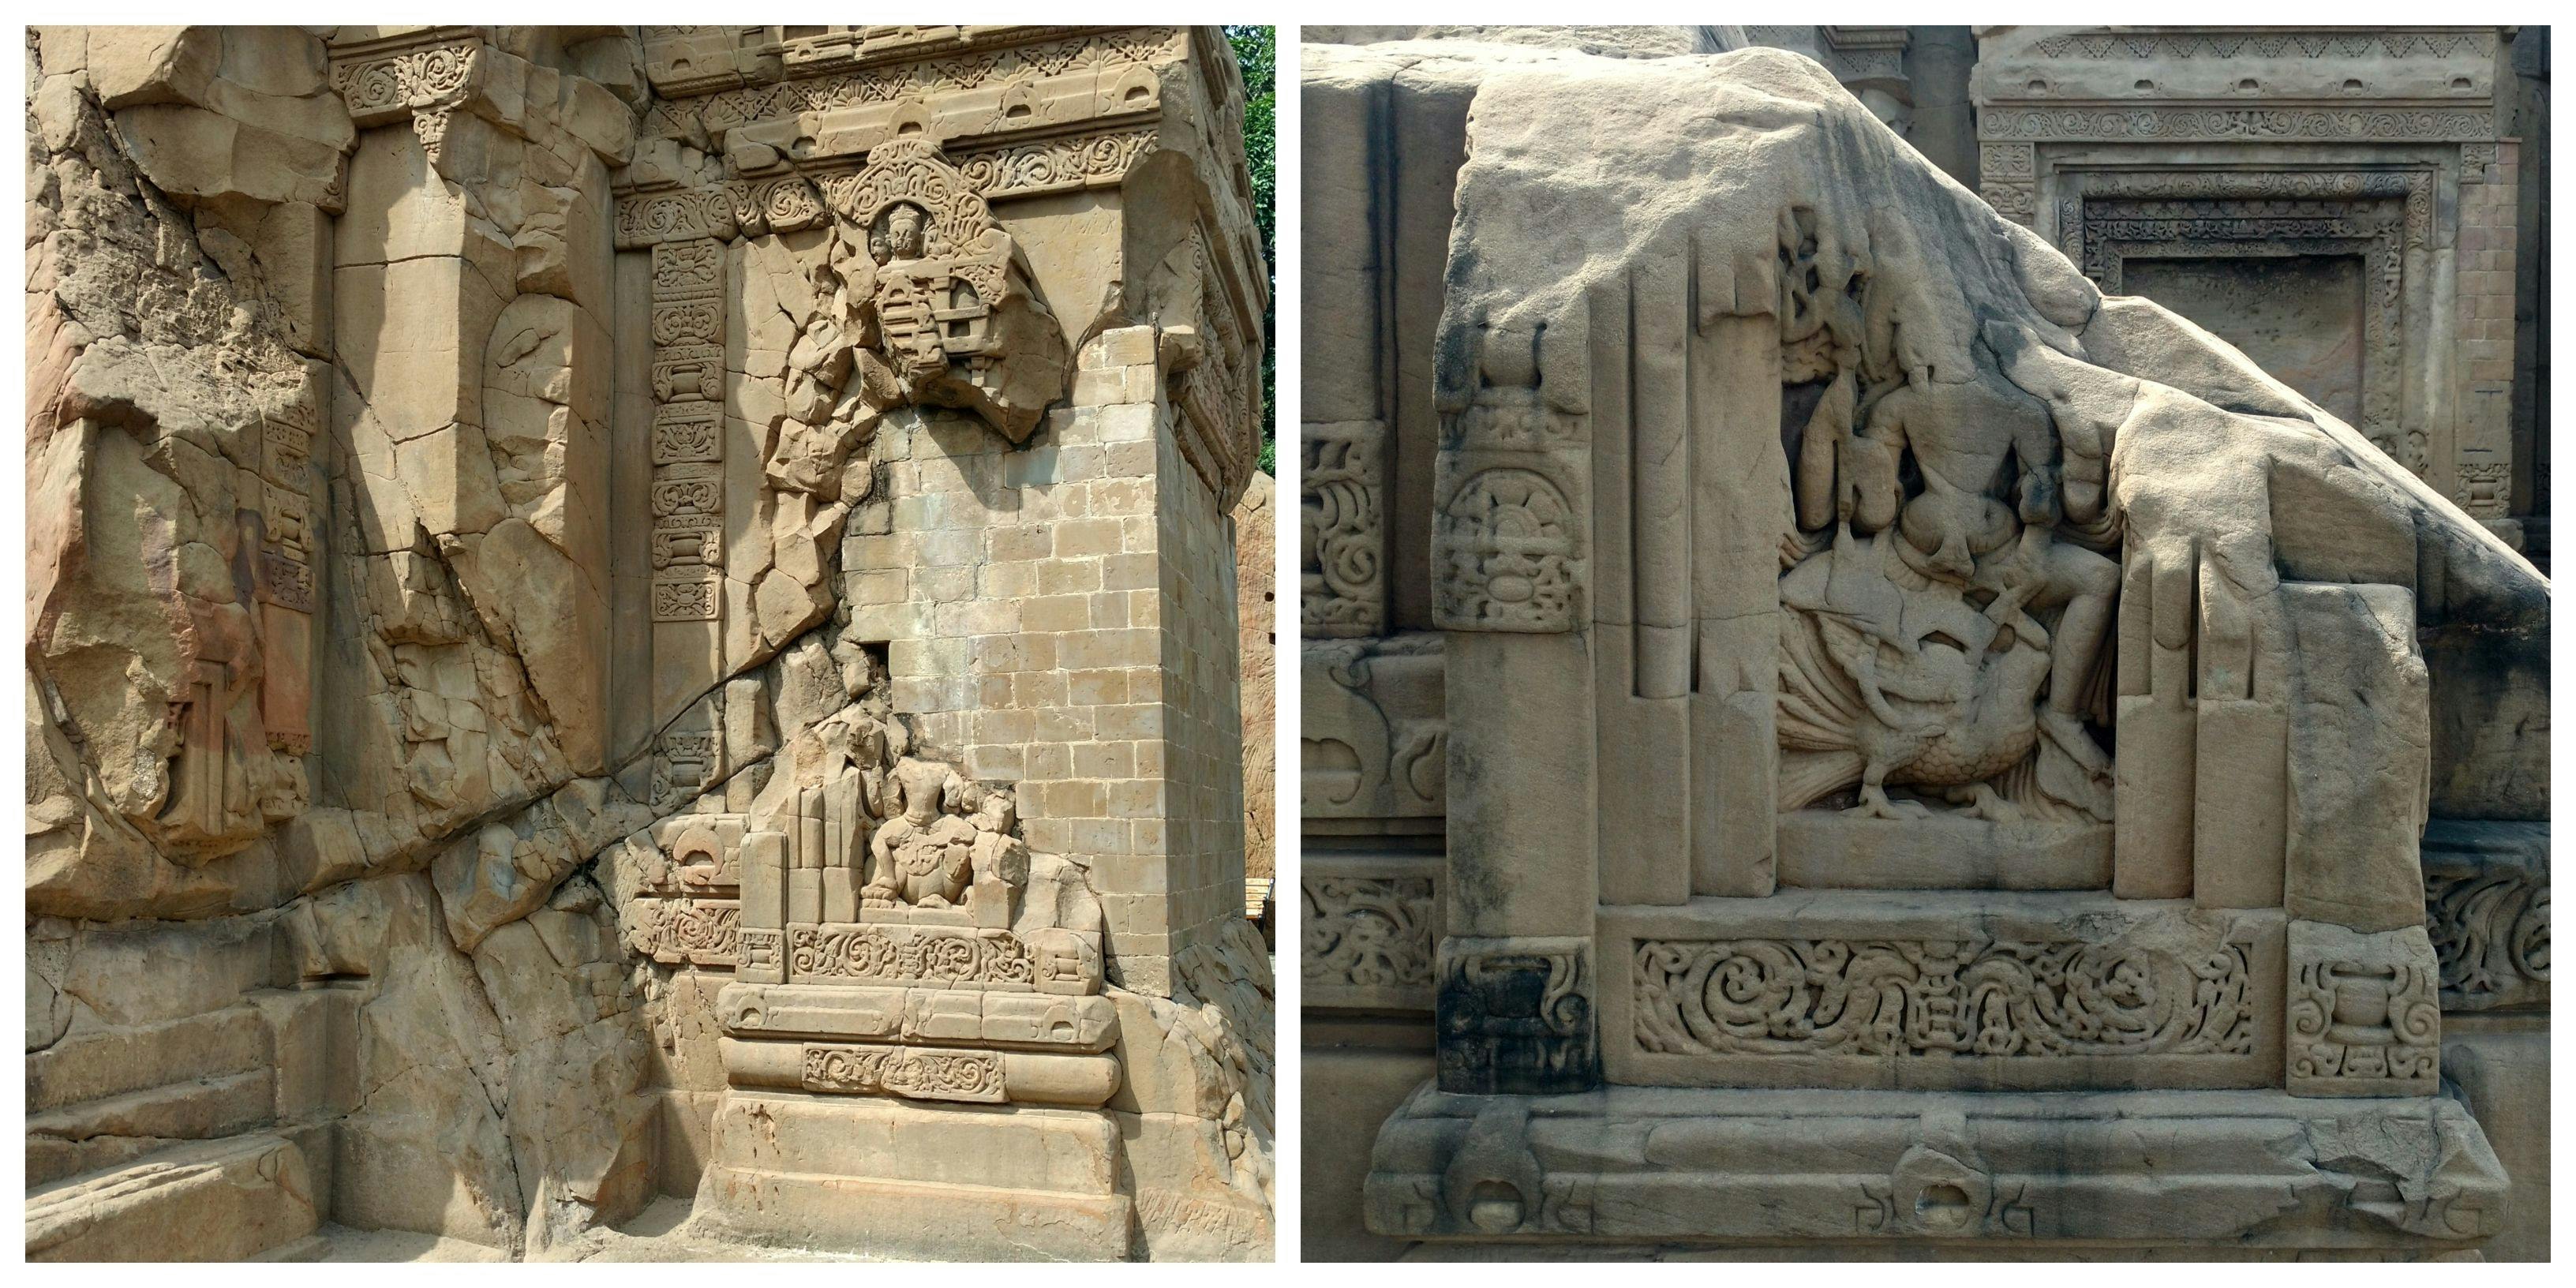 Sculptural details on the temple walls